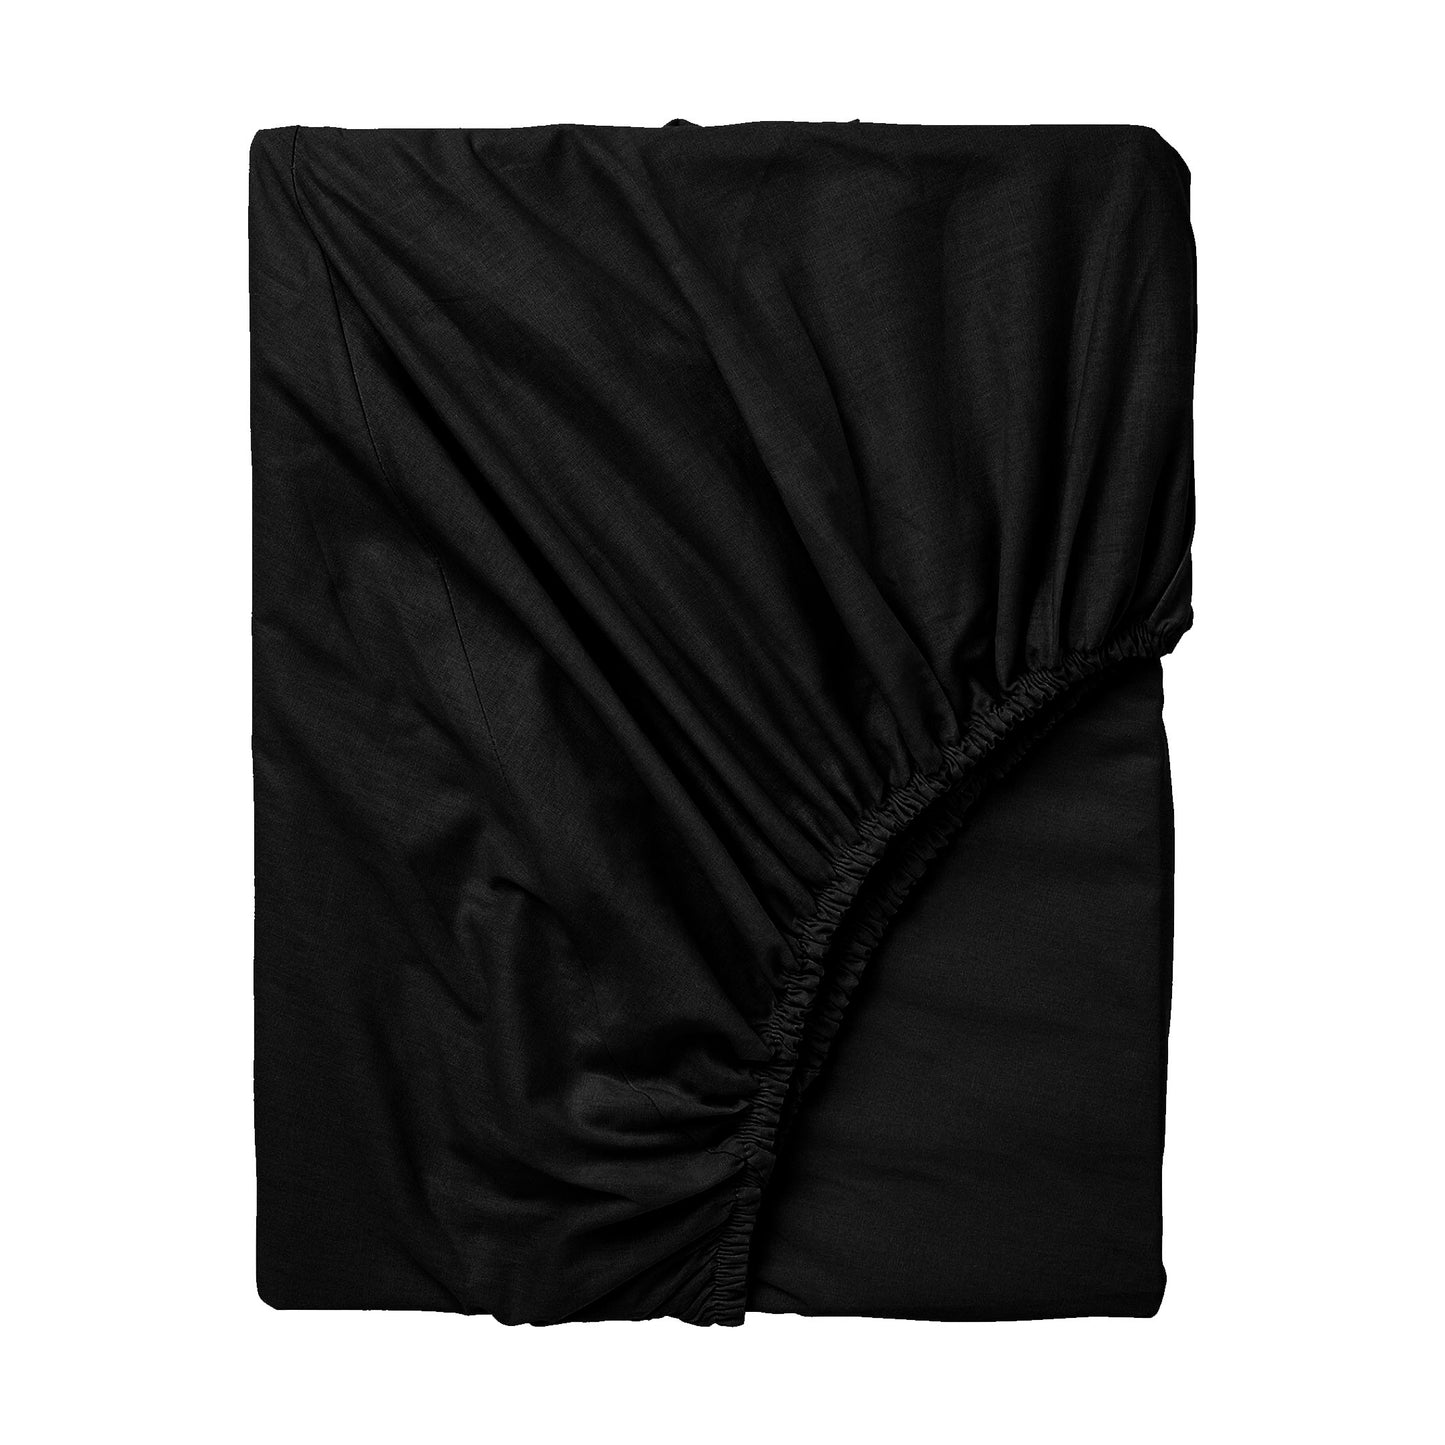 Midnight Black- fitted sheet - king size (3-pcs)